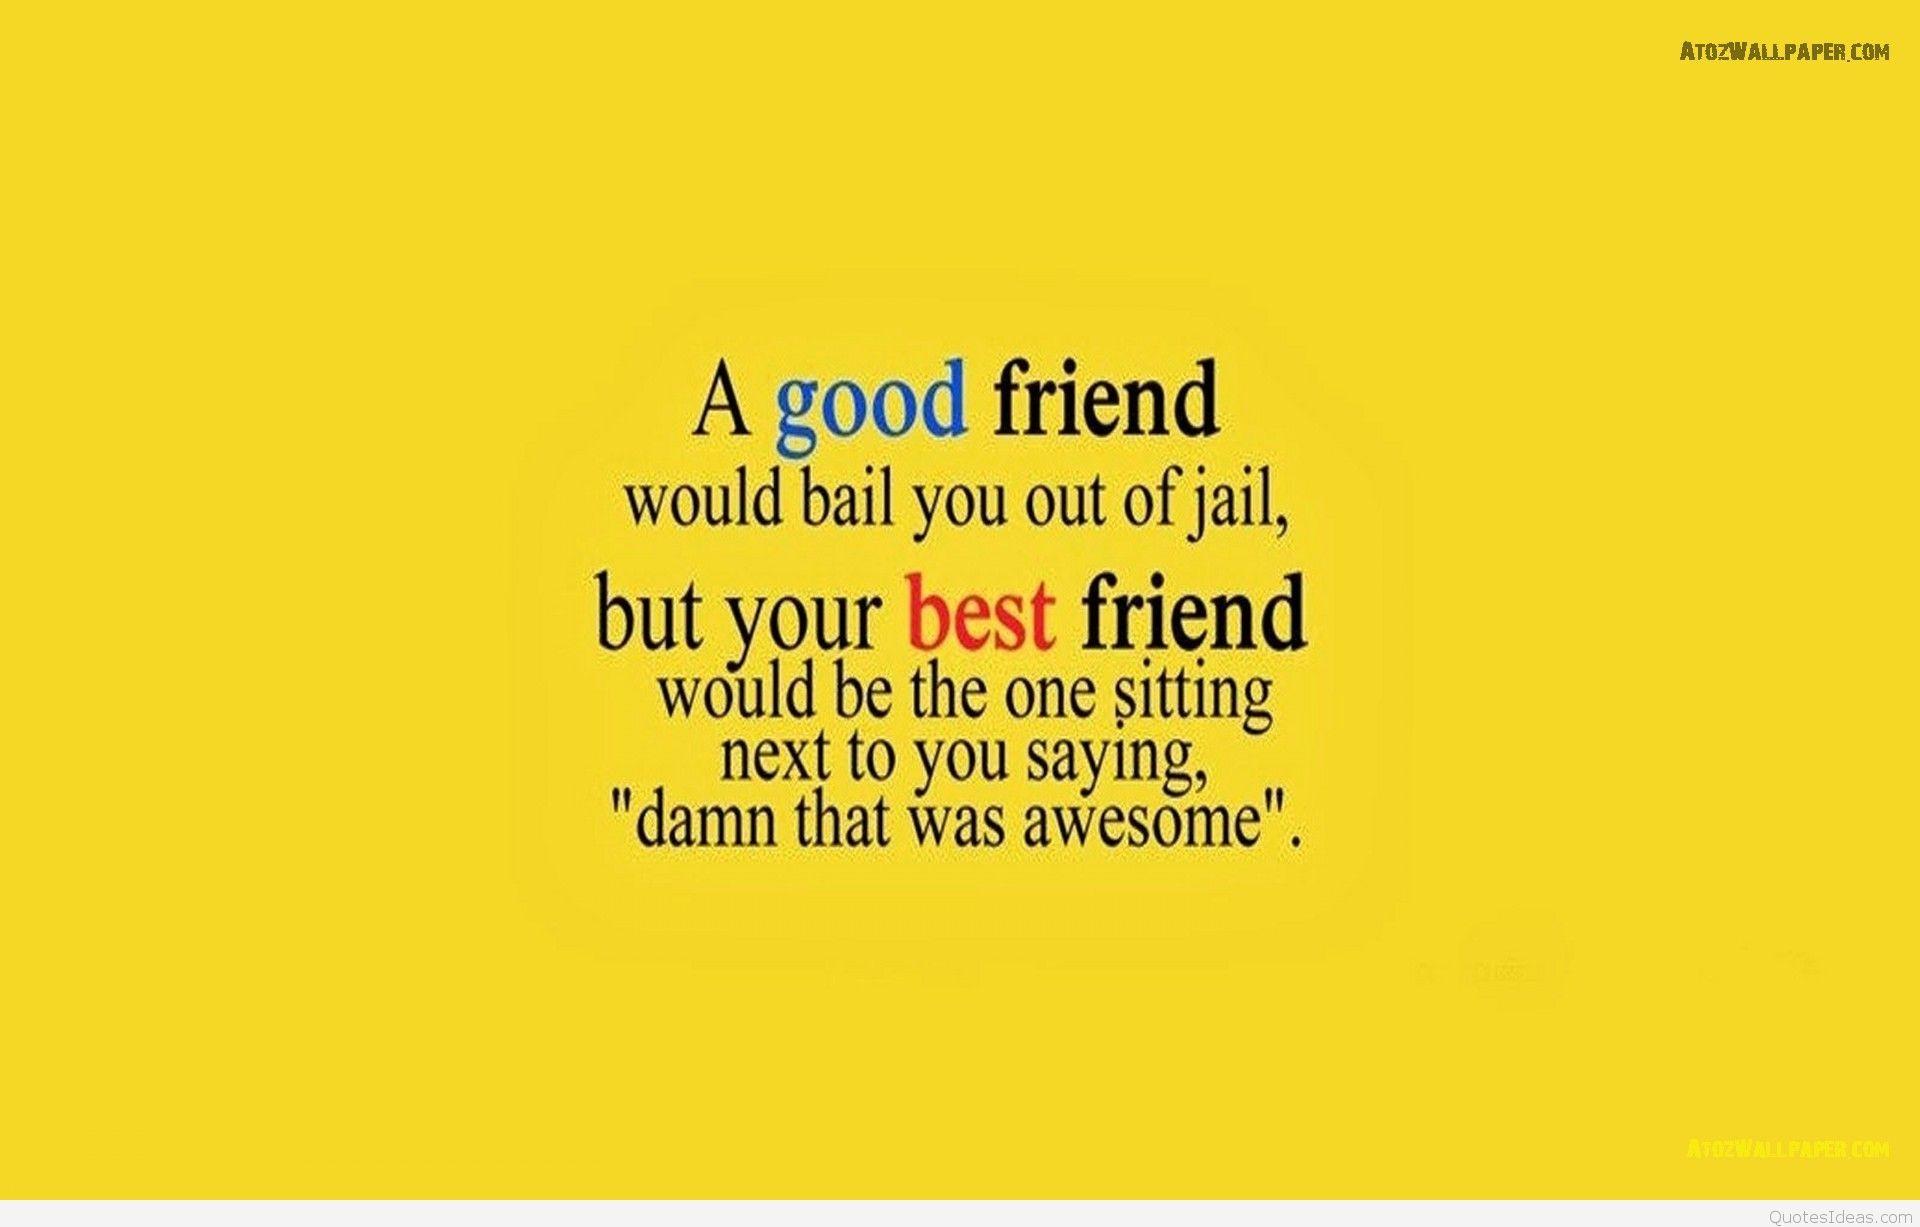 Best friendship wallpaper with quote